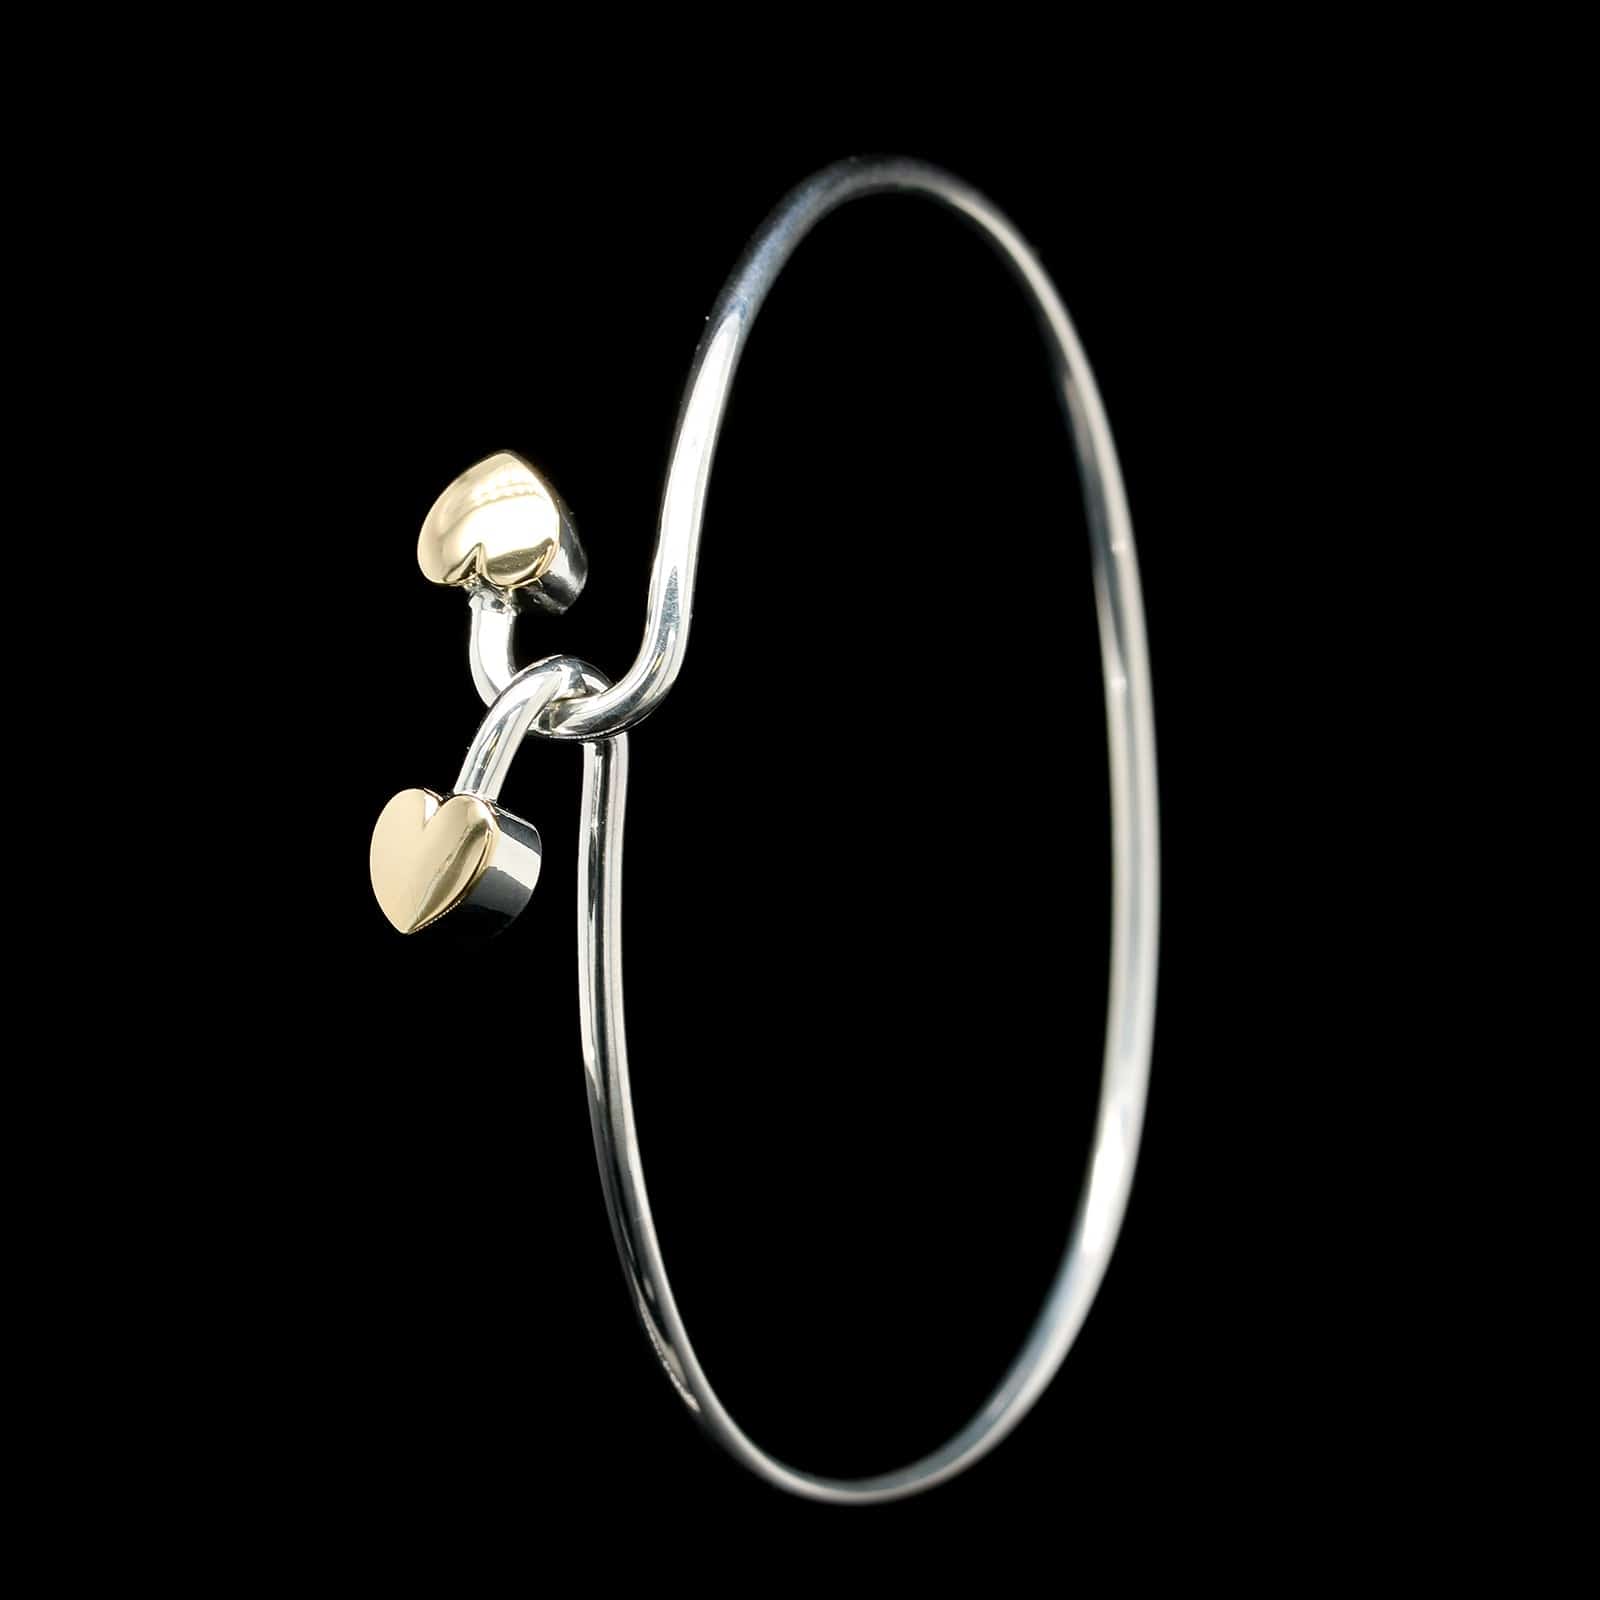 Tiffany & Co Sterling Silver and 18K Yellow Gold Estate Heart Hook Bangle Bracelet, Sterling silver and 18k yellow gold, Long's Jewelers